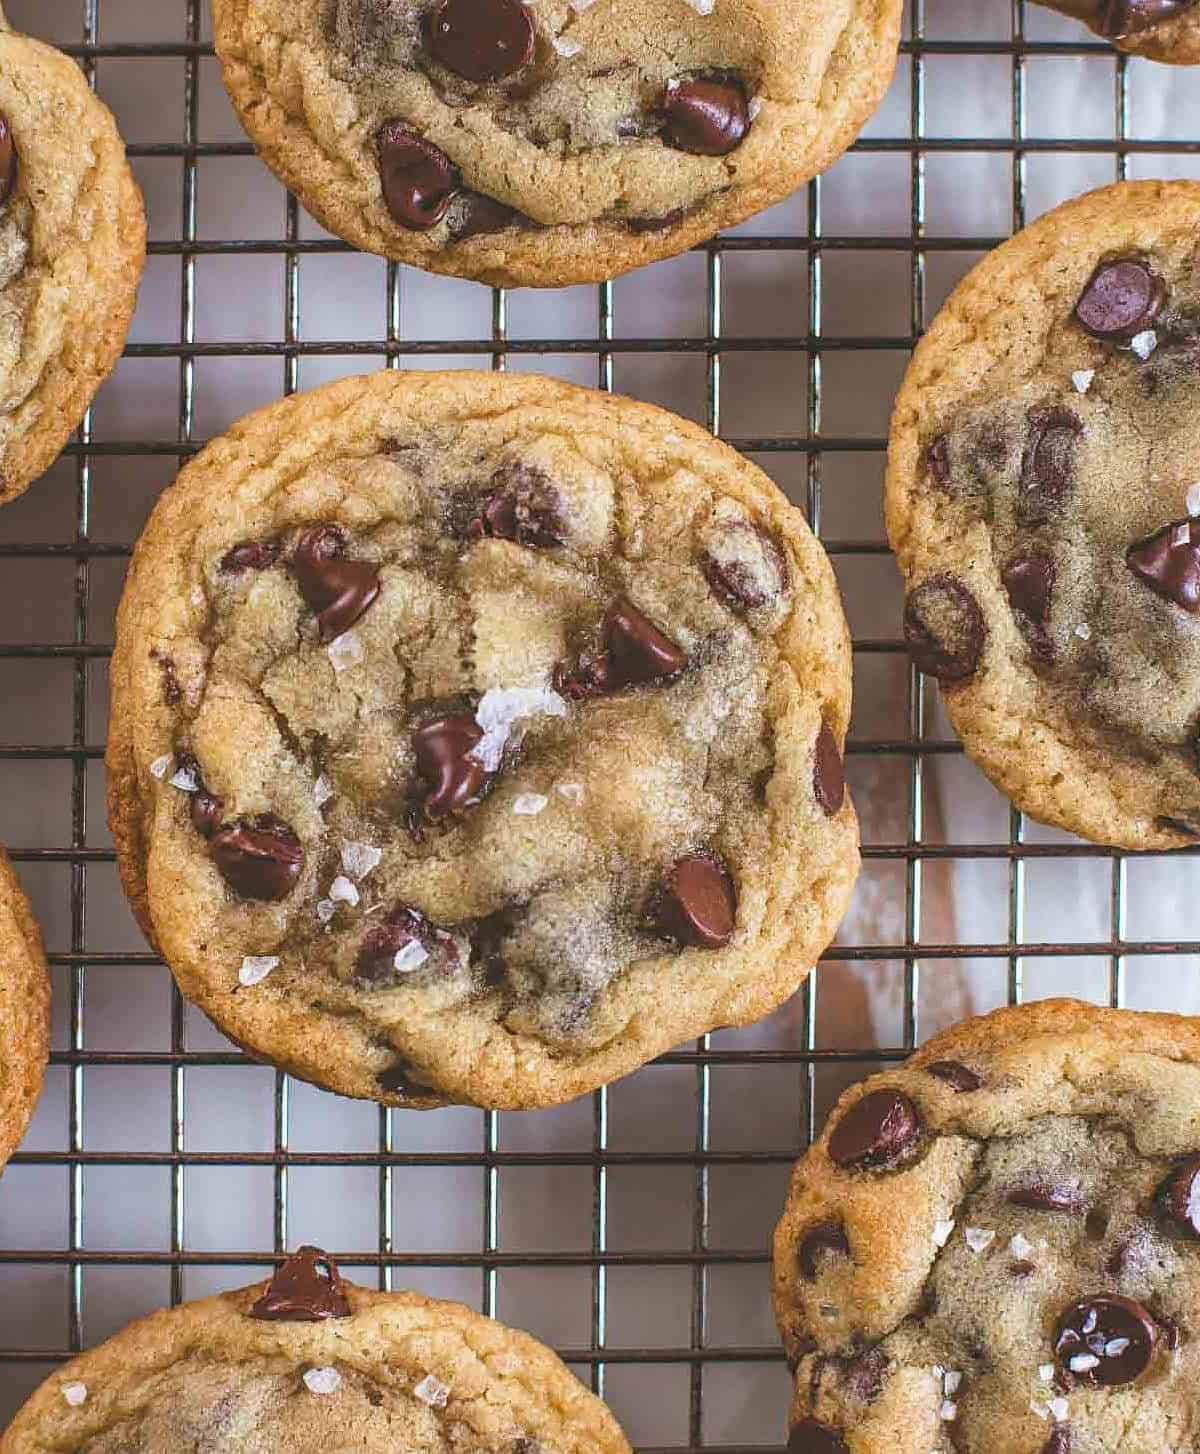  These cookies require a bit of patience, but trust me, they are worth the wait.